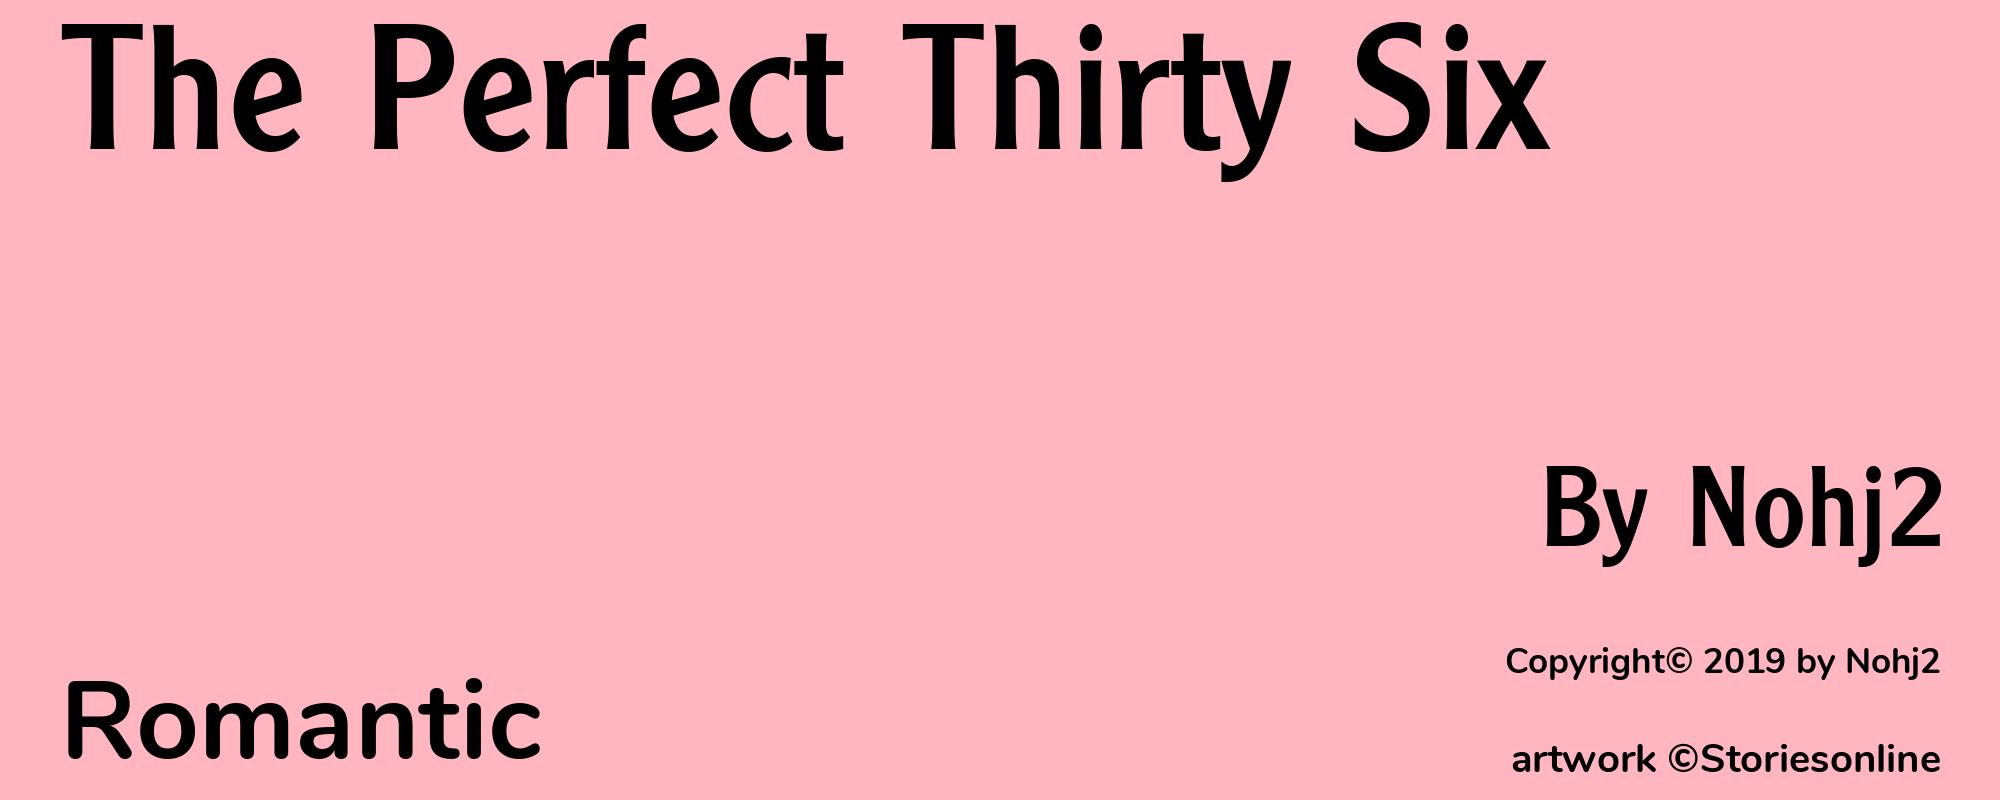 The Perfect Thirty Six - Cover